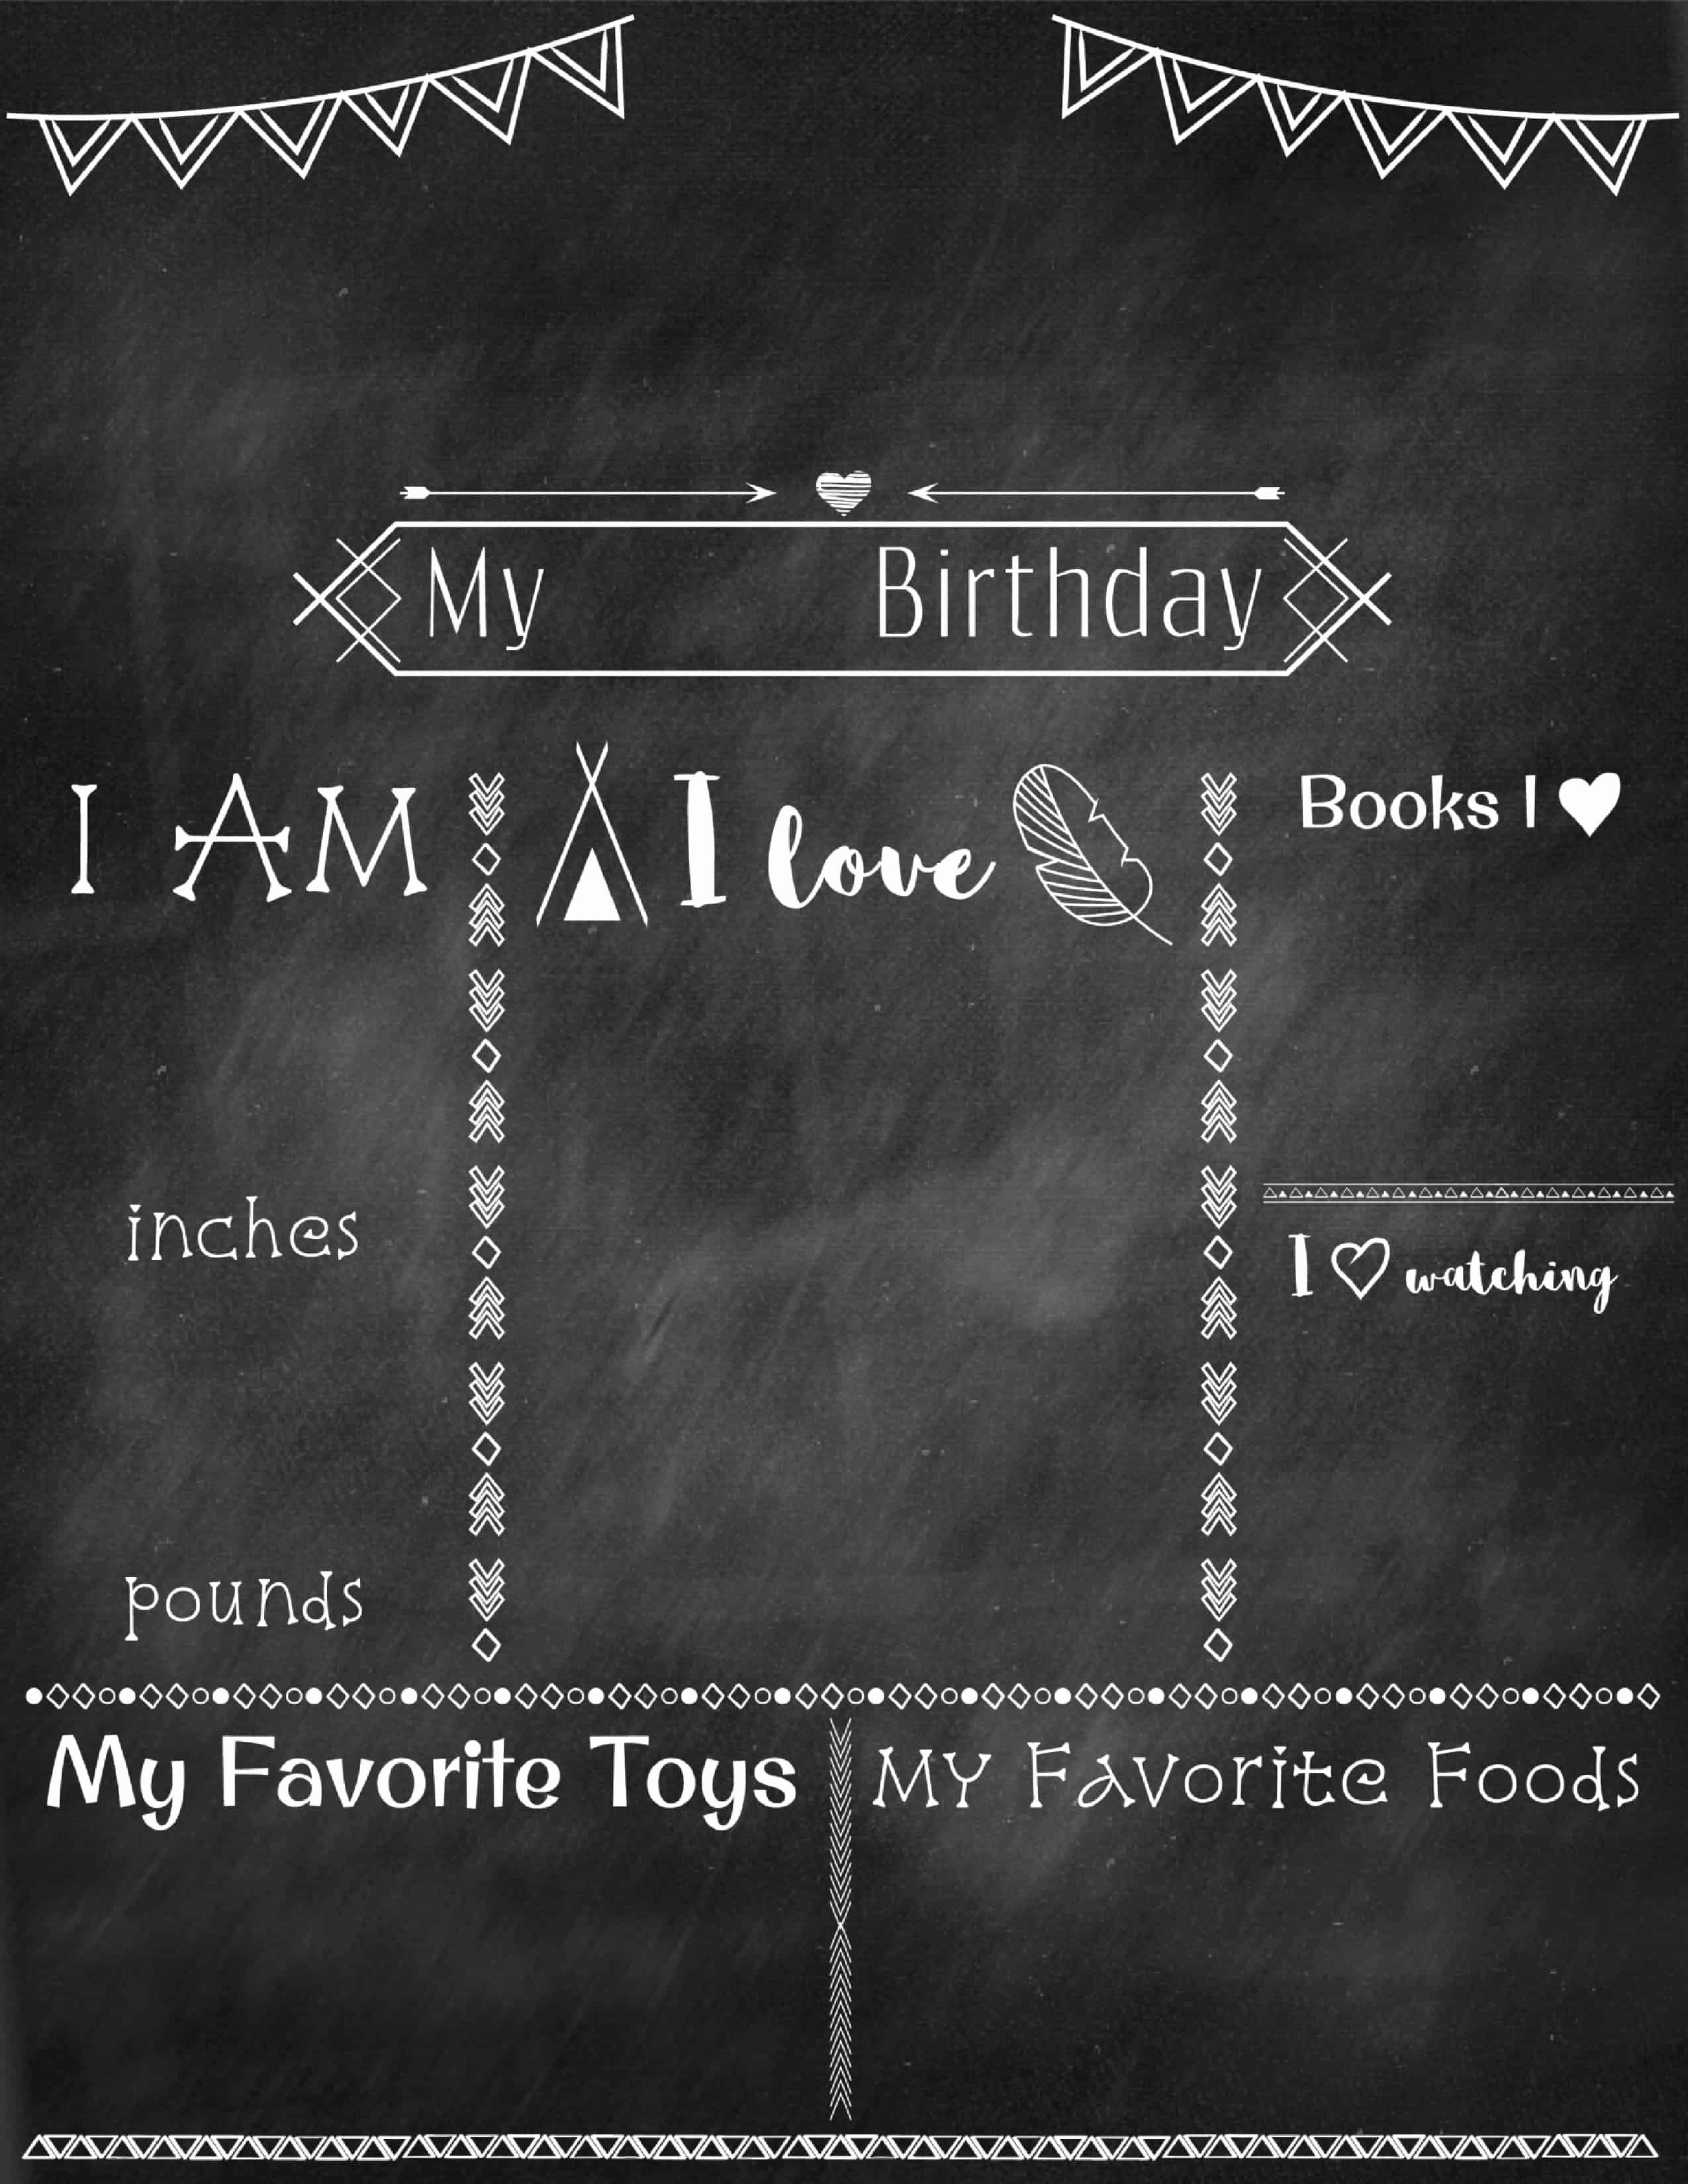 Birthday Chalkboard Template Lovely Birthday Poster Template Free with Step by Step Tutorial